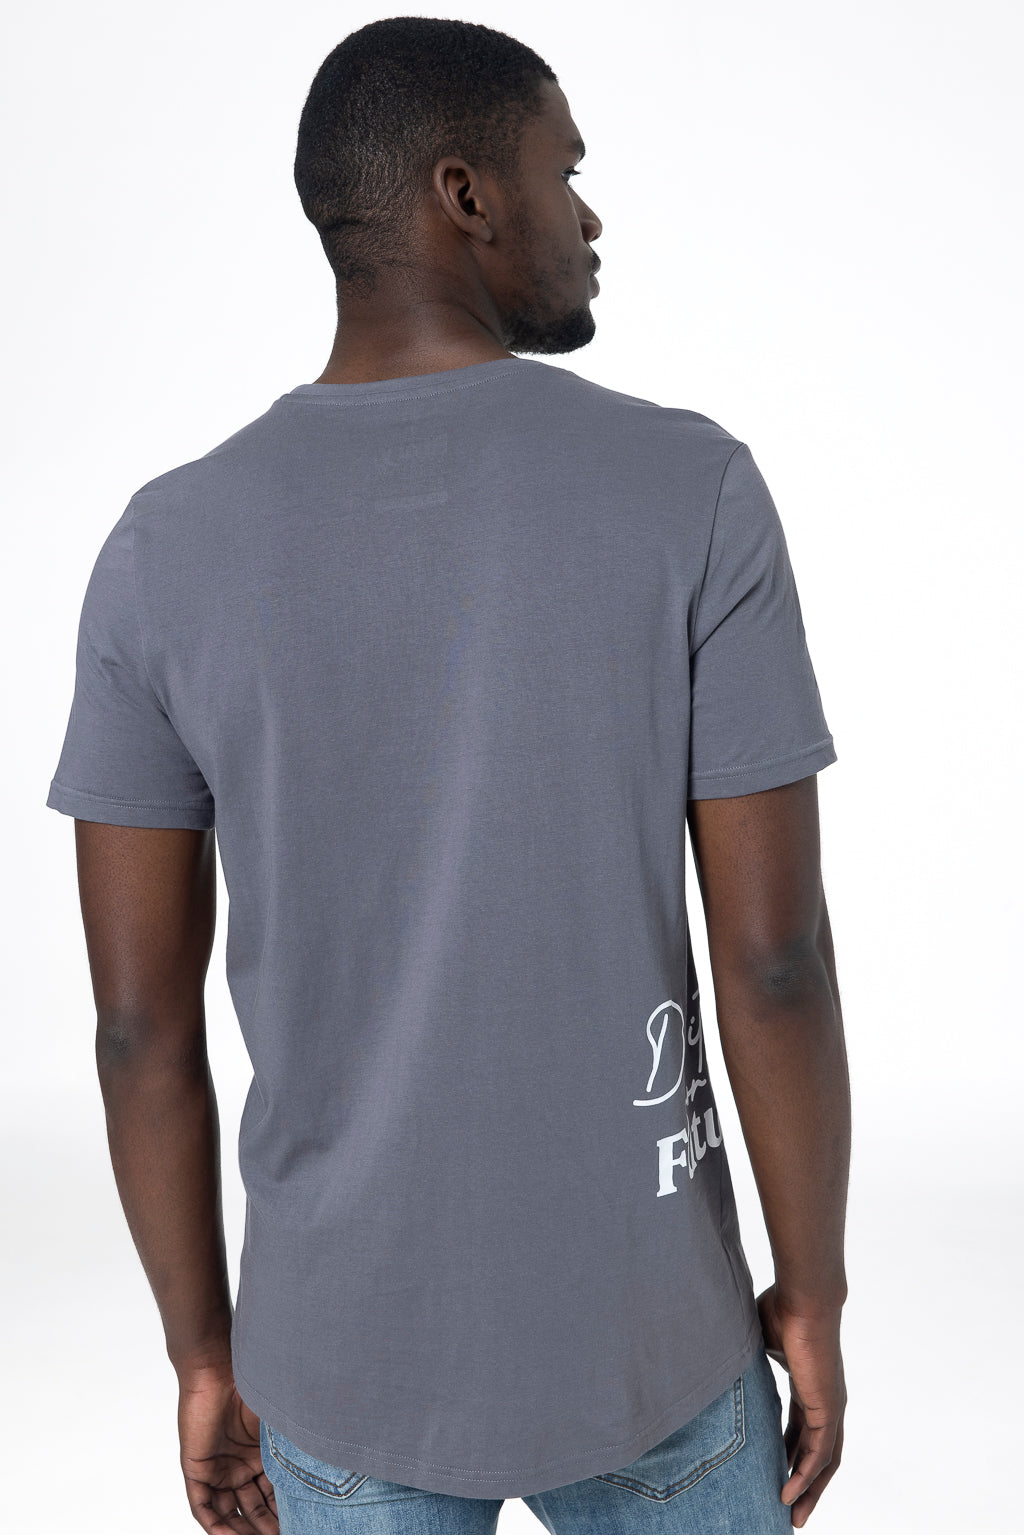 Branded T-Shirt _ 142509 _ Charcoal